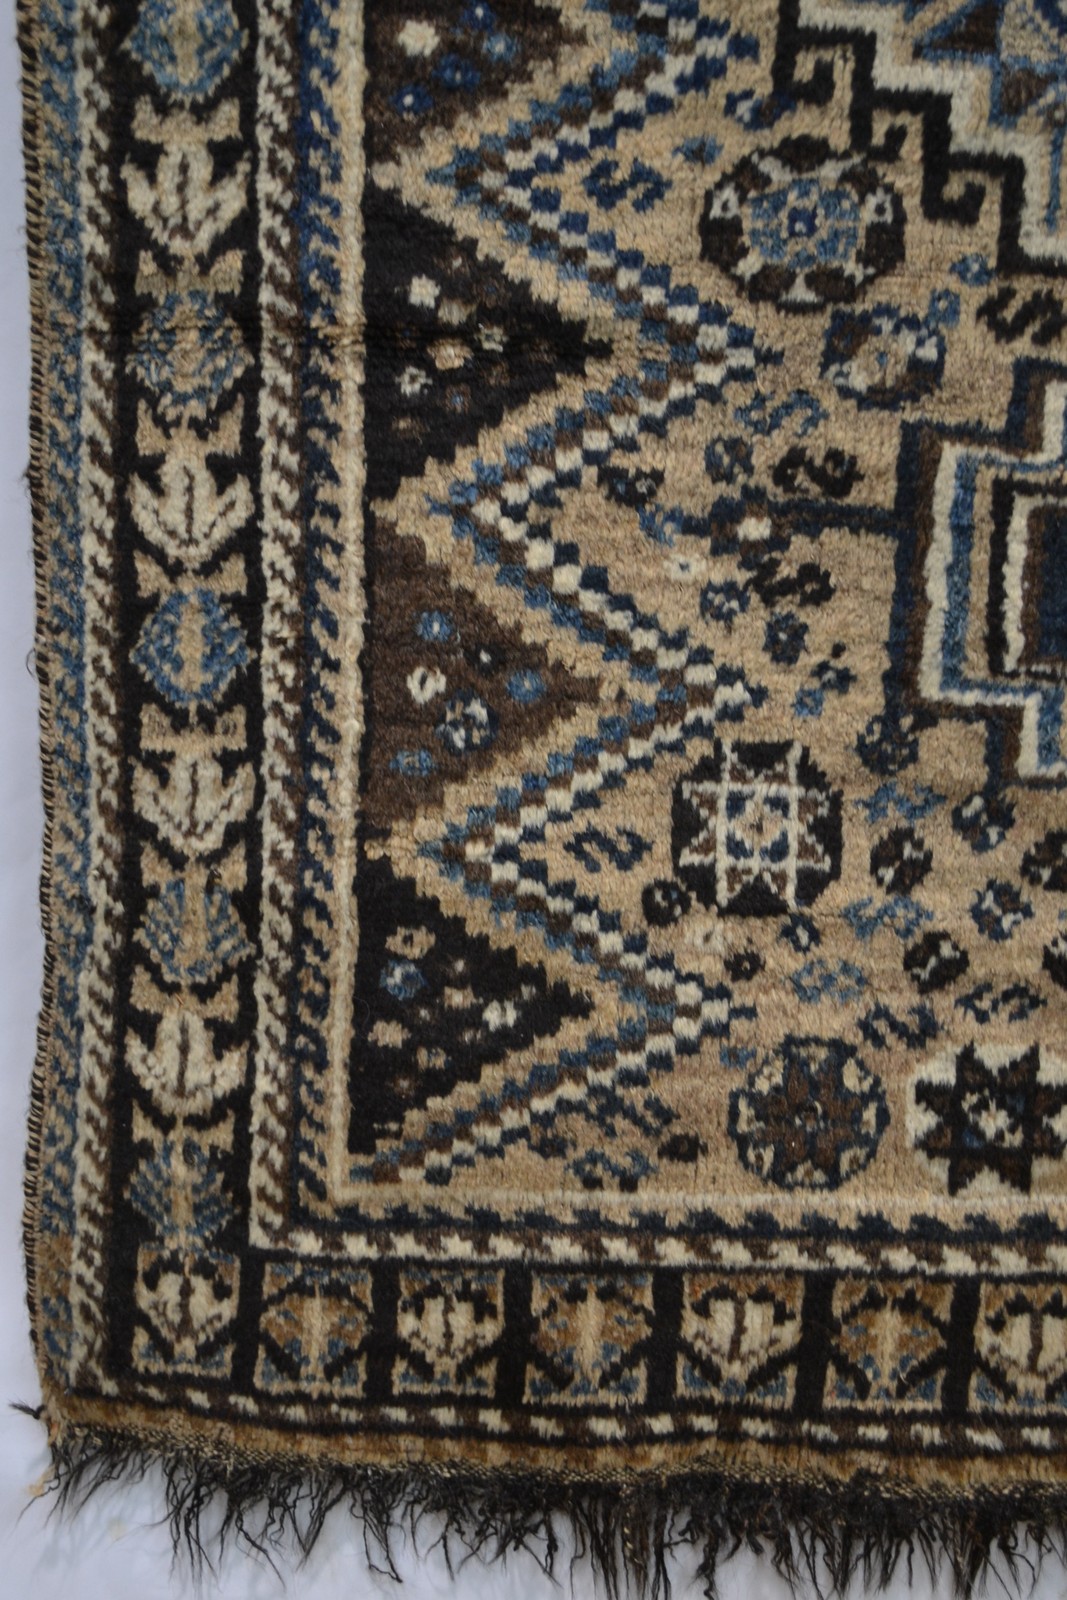 Fars rug, Shiraz region, south west Persia, mid-20th century, 7ft. 10in. x 5ft. 2.39m. x 1.52m. - Image 3 of 3